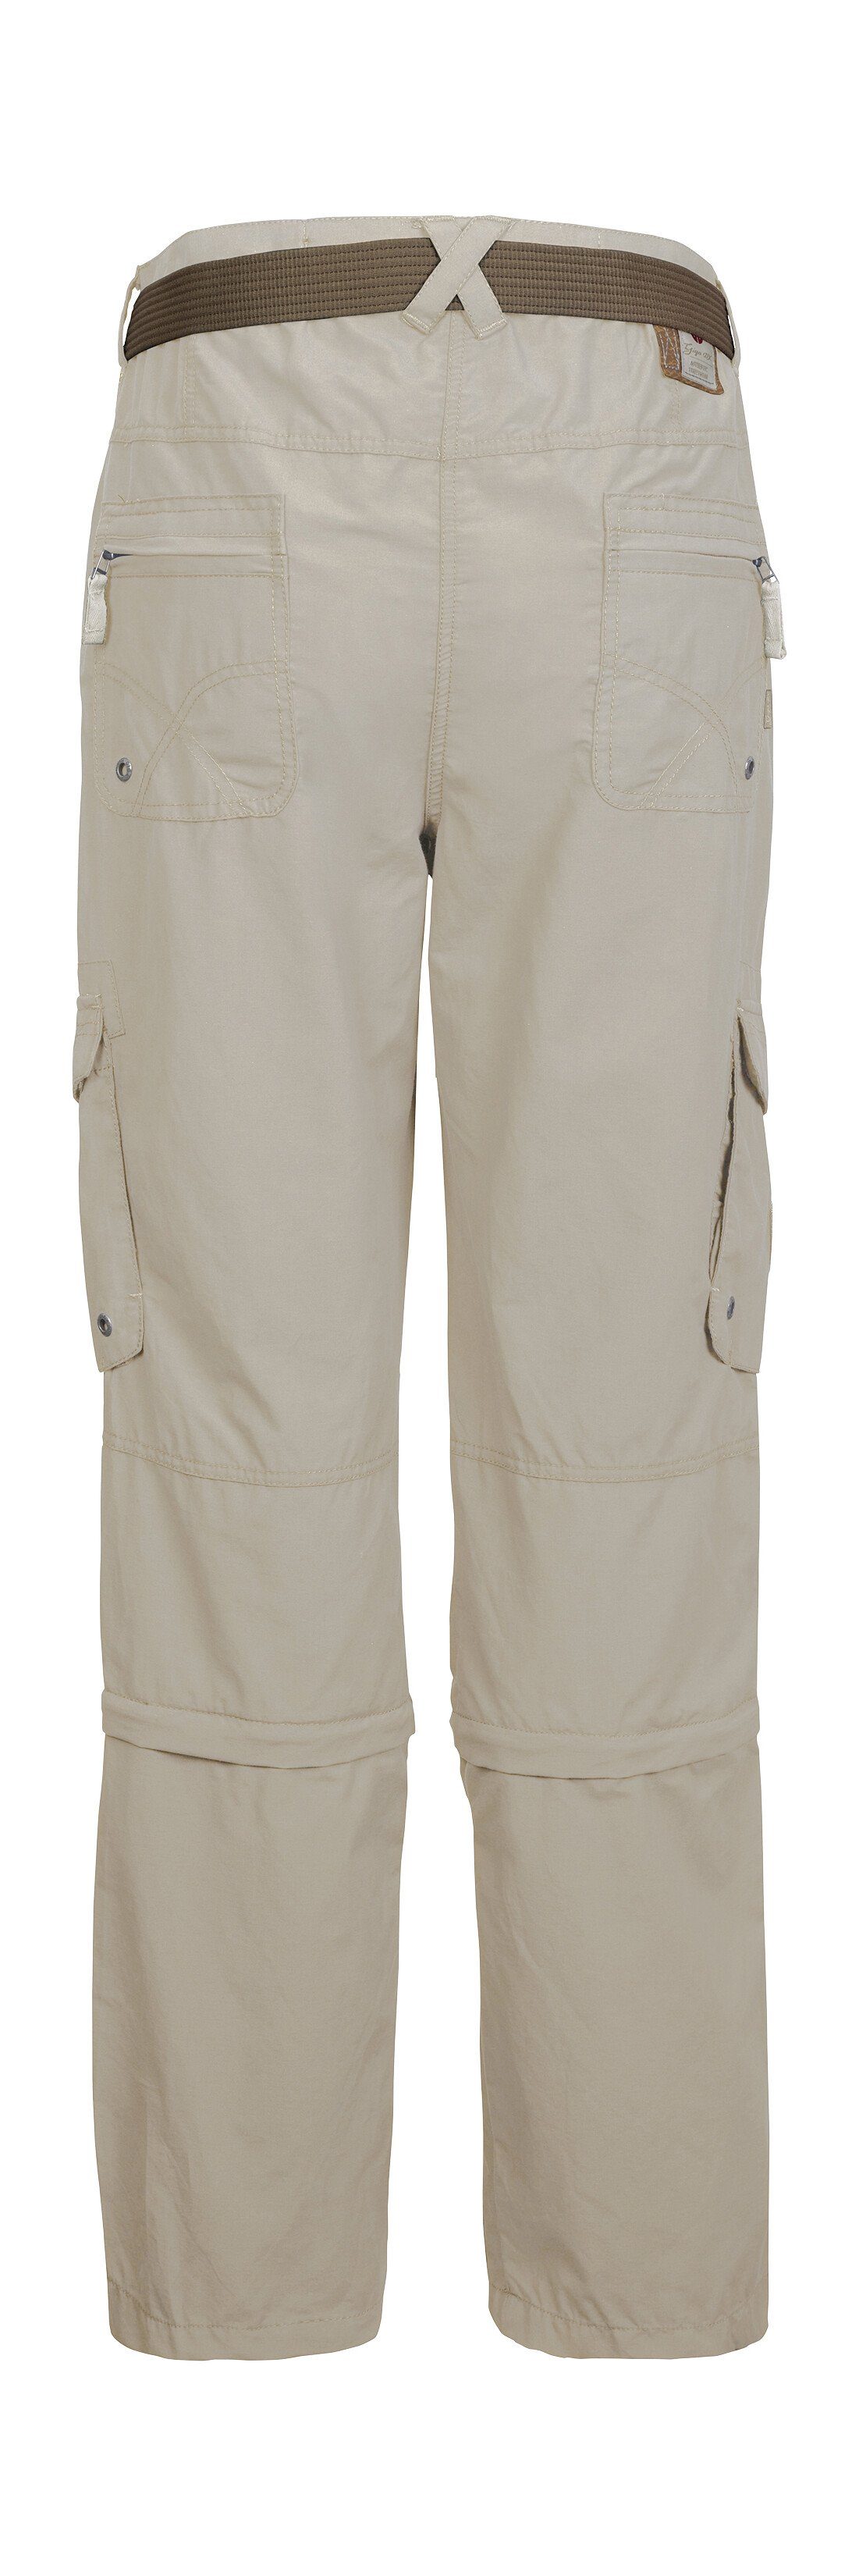 G.I.G.A. DX 37 WMN GS killtec by PNTS hellbeige Zip-off-Hose